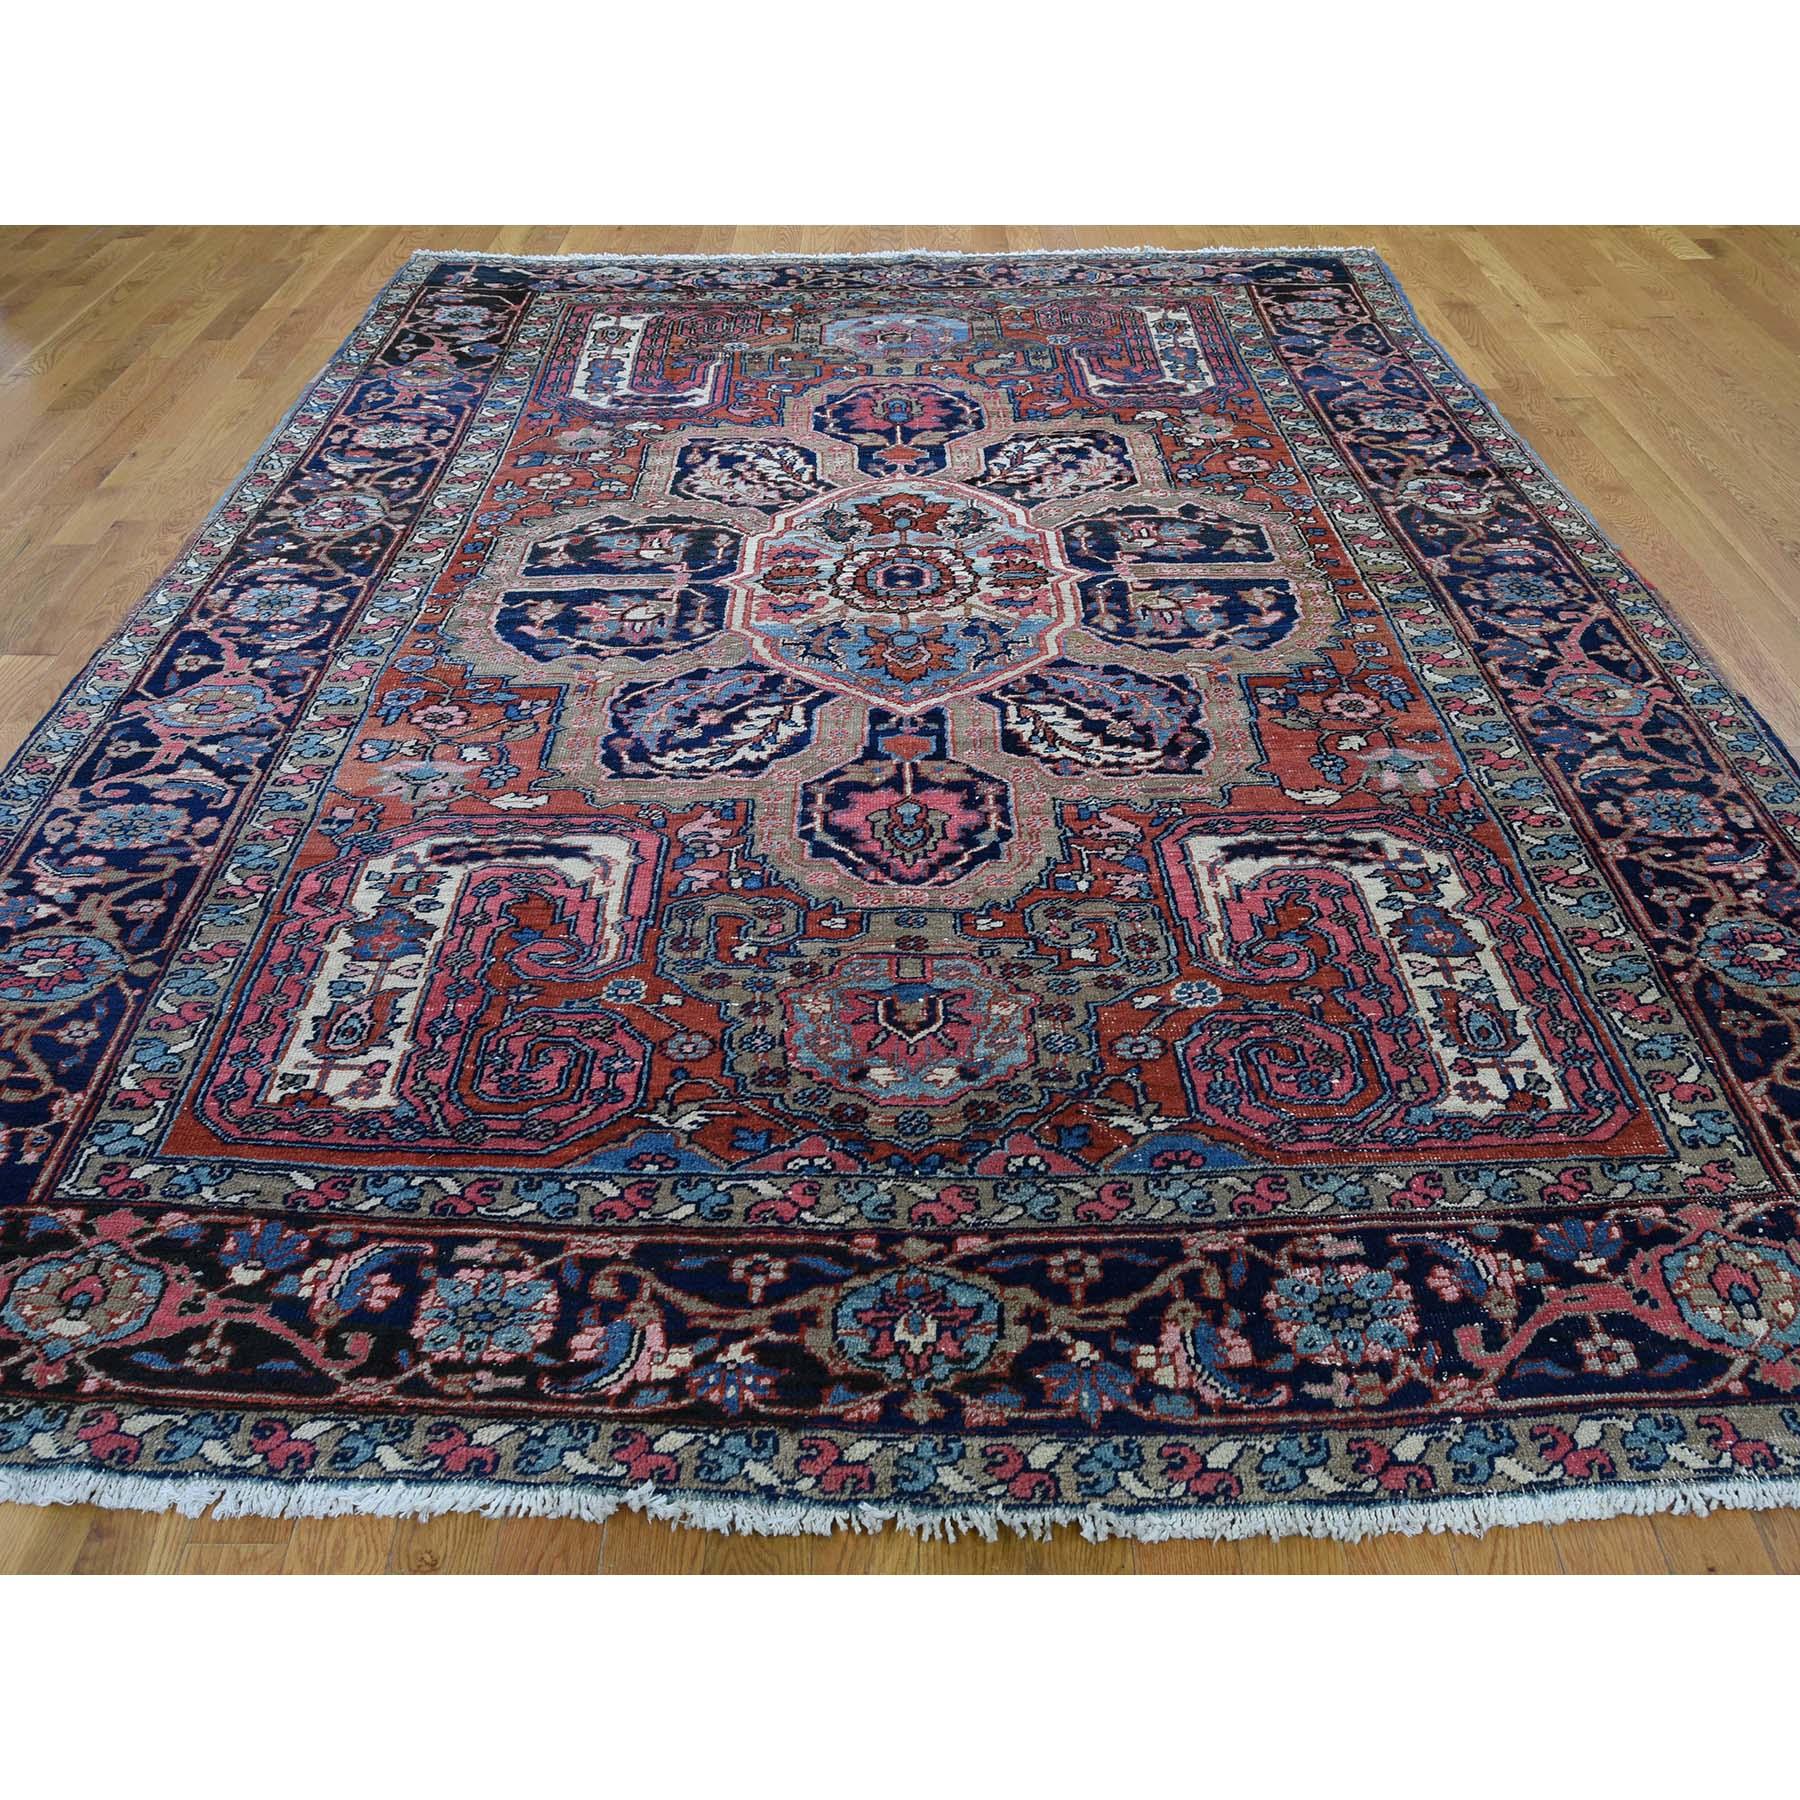 Other Antique Persian Heriz Good Condition Flower Design Hand-Knotted Oriental Rug